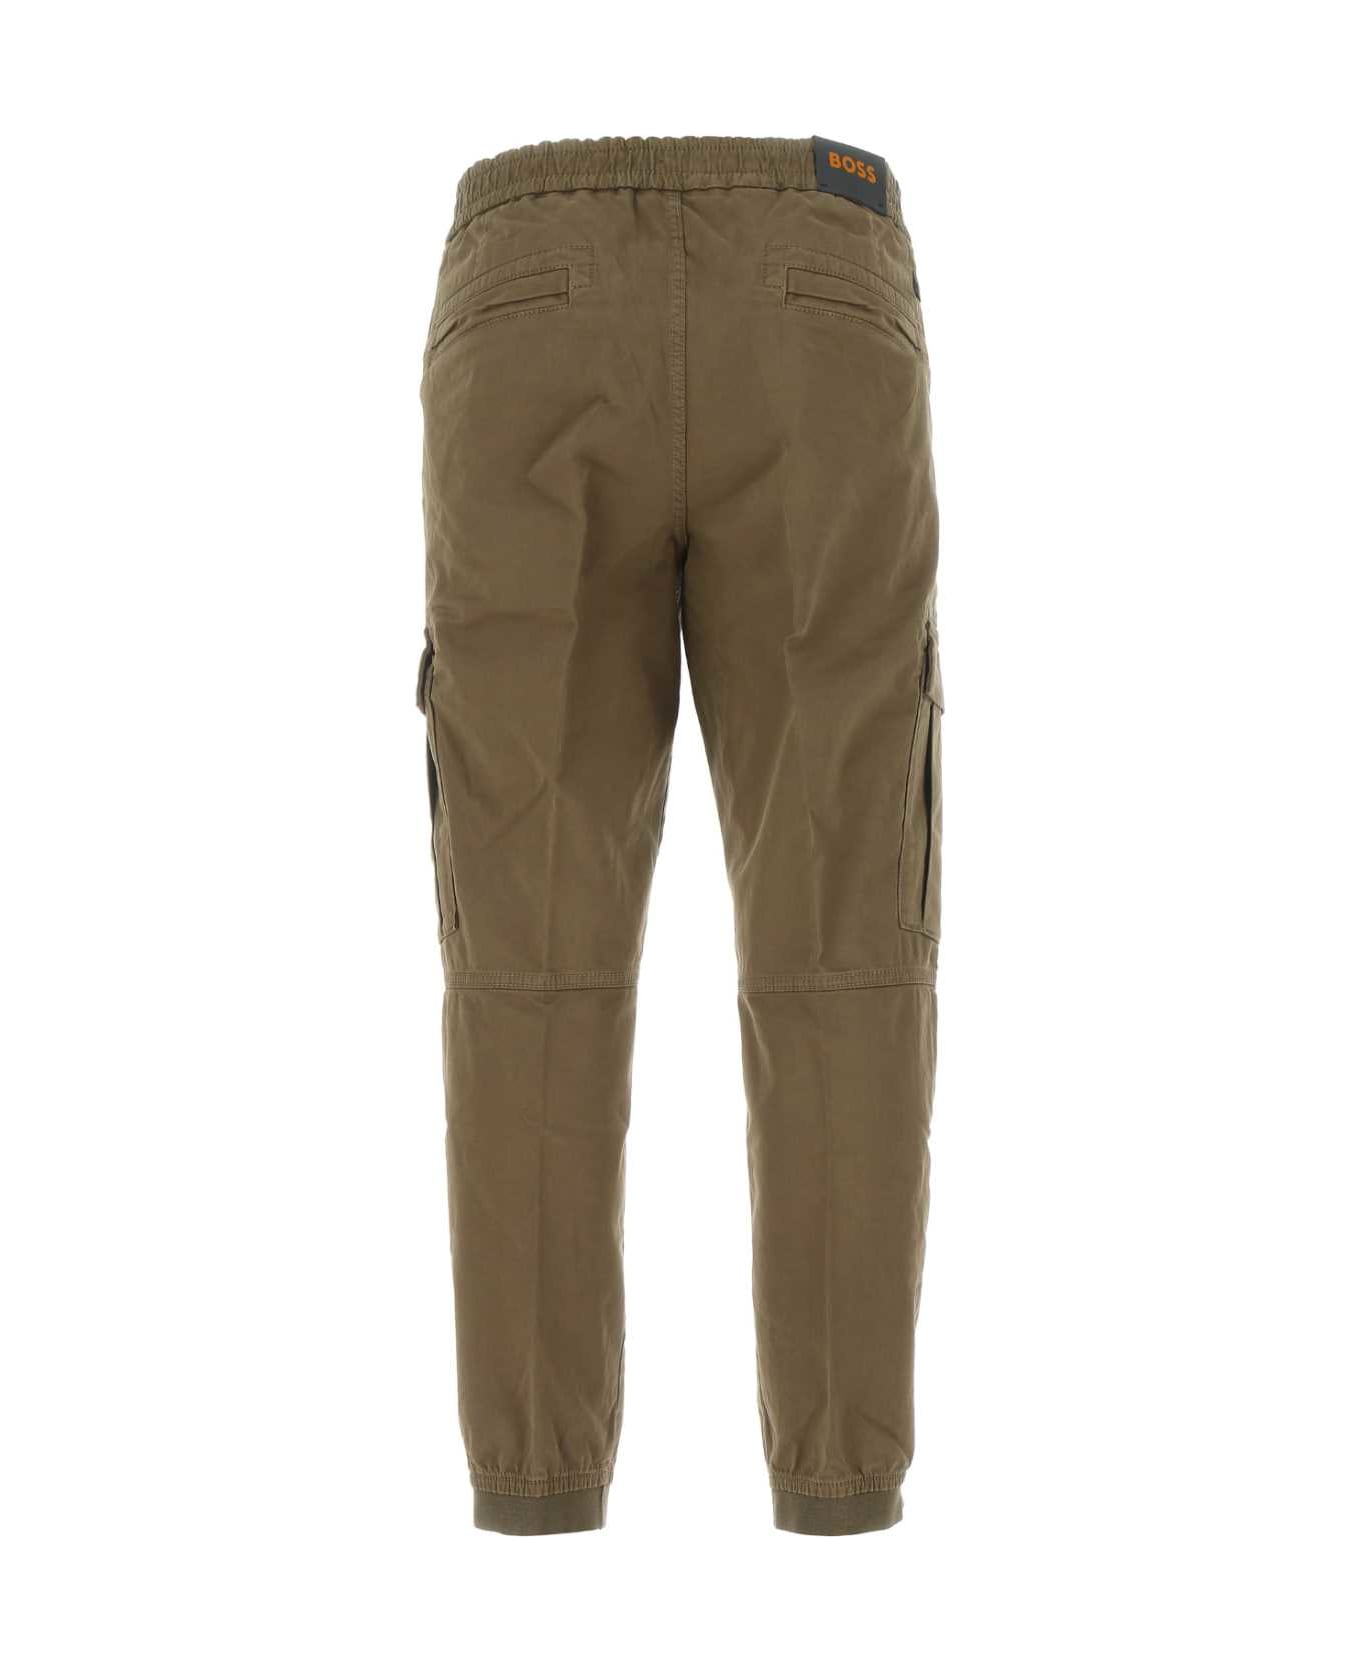 Hugo Boss Brown Stretch Cotton Cargo Pant - 308 ボトムス